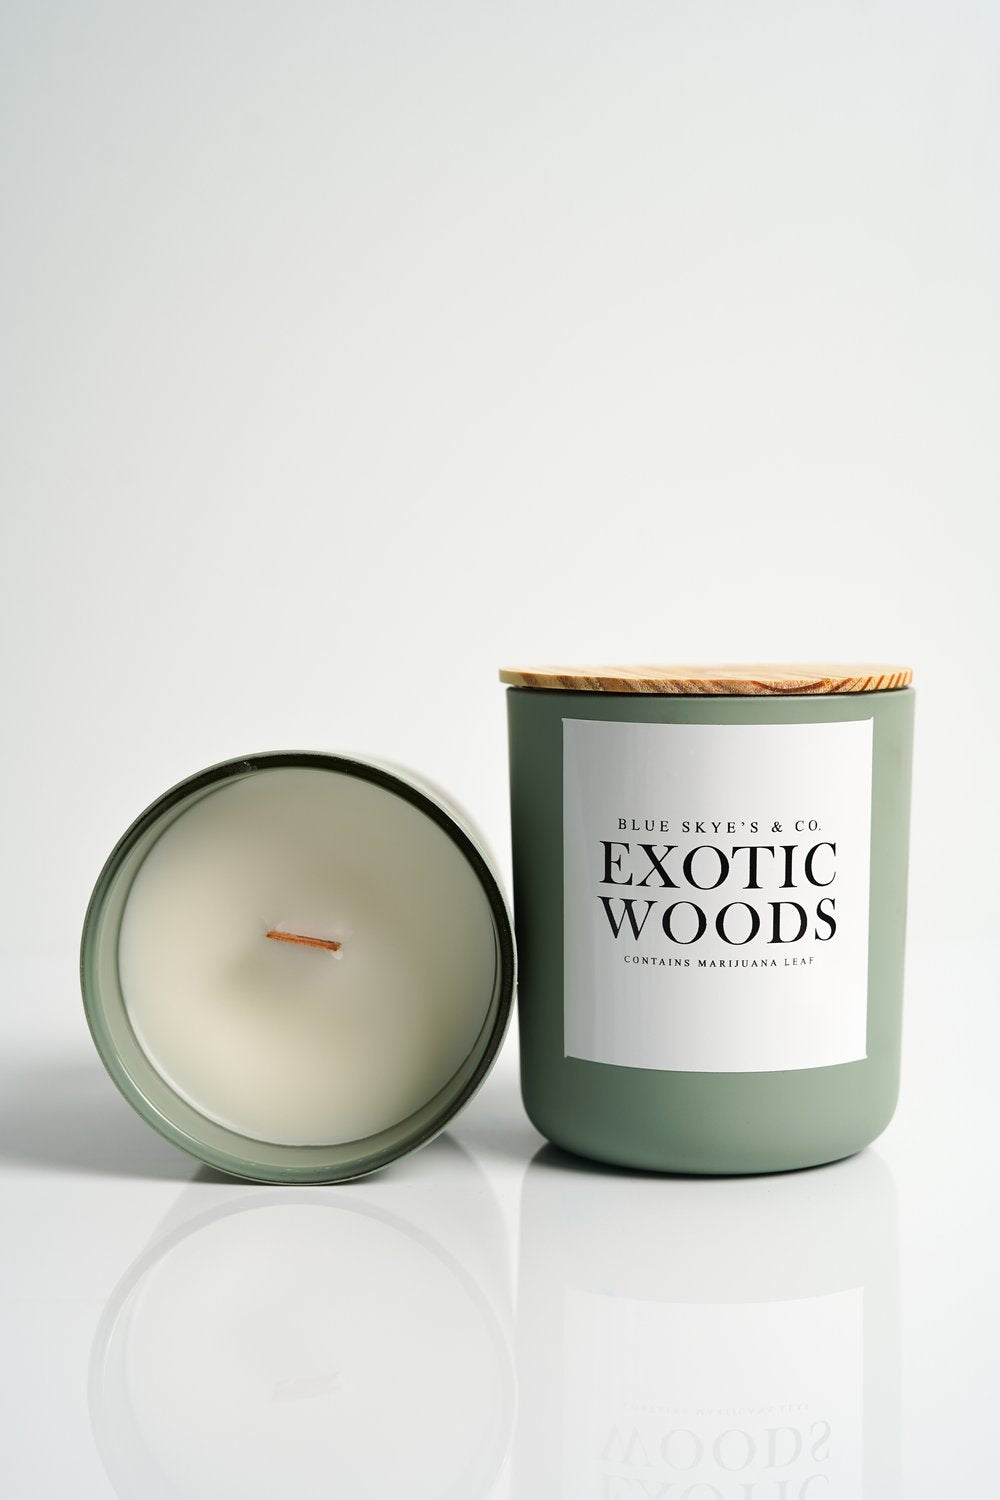 Blue Skye's & Co. | Exotic Woods Soy Candle